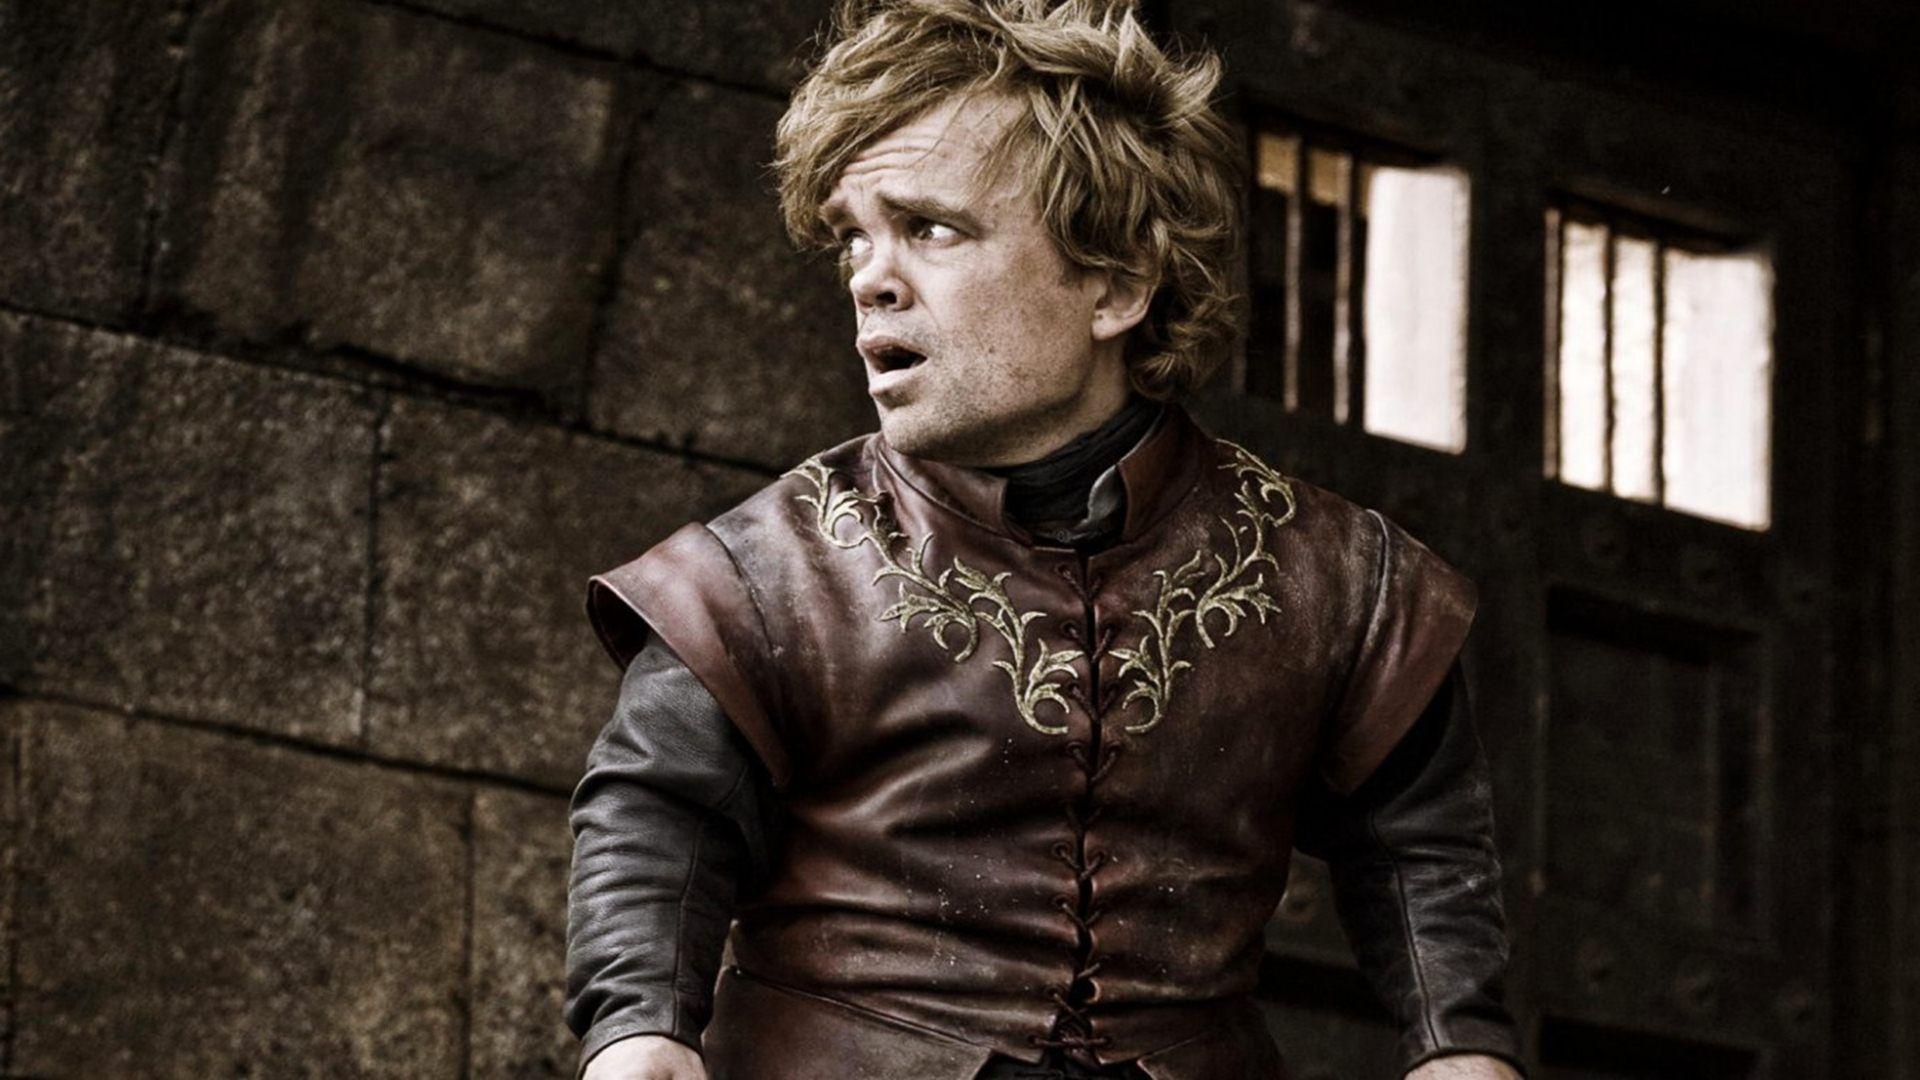 Wallpaper The popular actor Peter Dinklage or Tyrion Lannister On